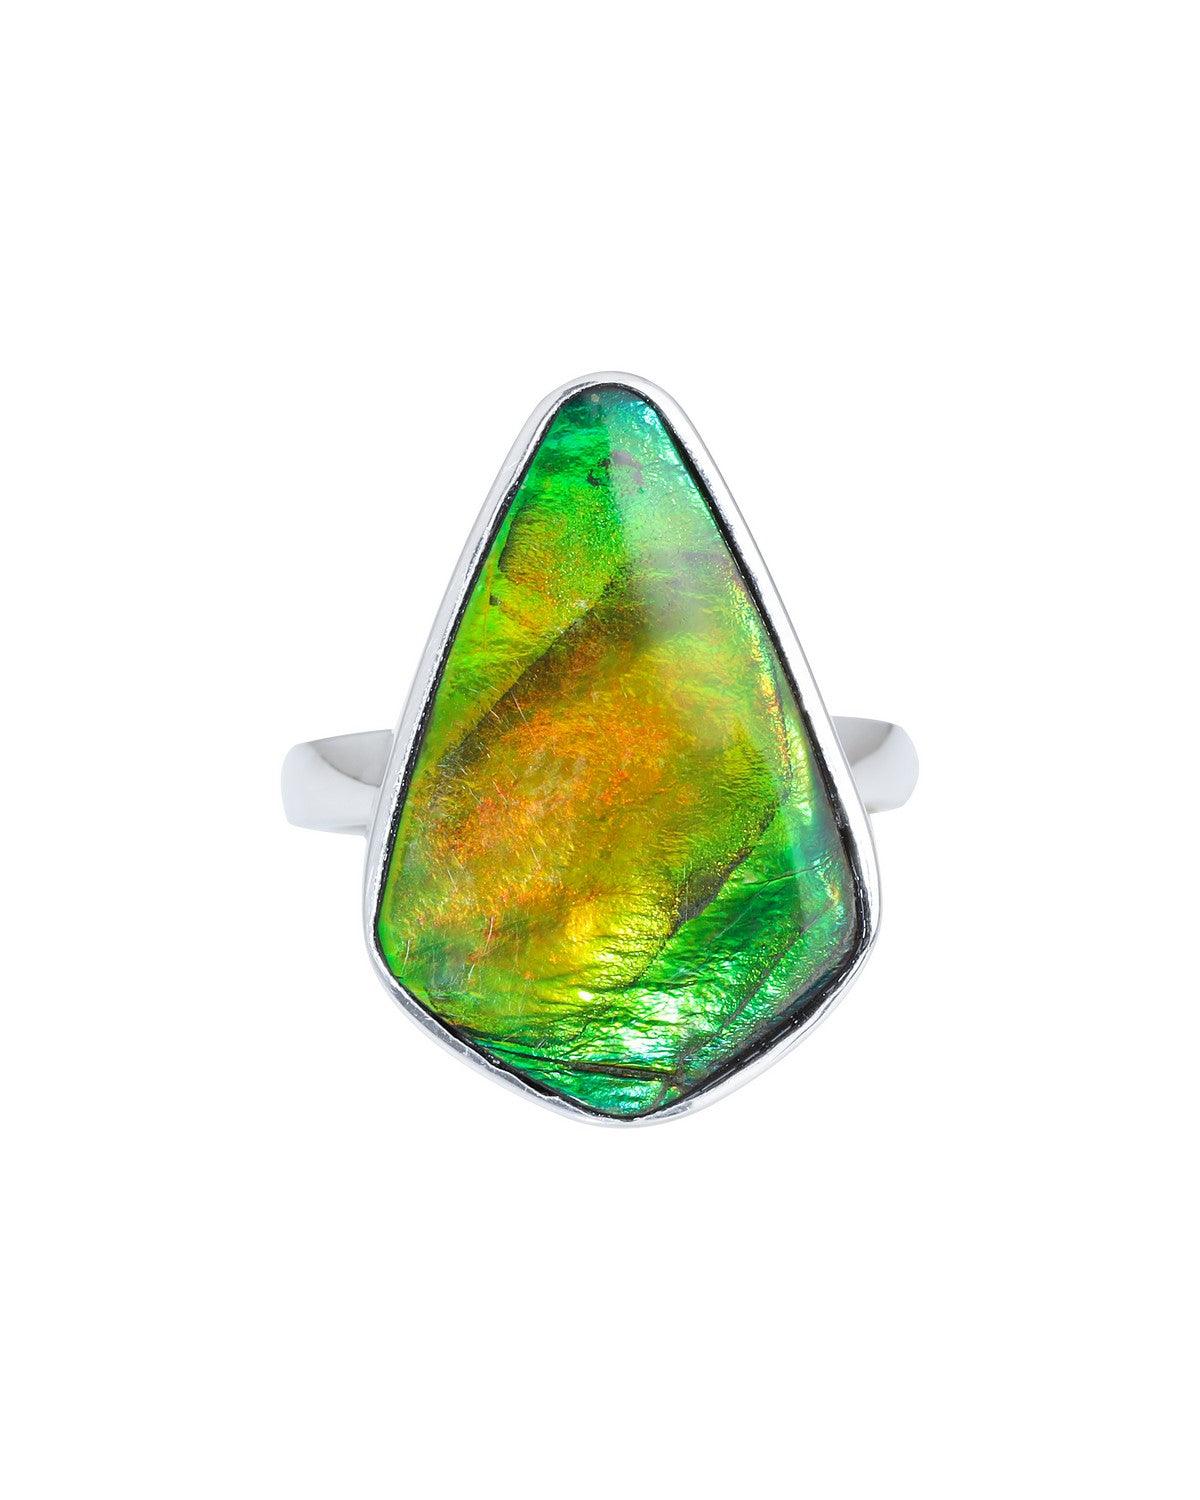 11 Ct. Ammolite Solid 925 Sterling Silver Statement Ring Jewelry - YoTreasure